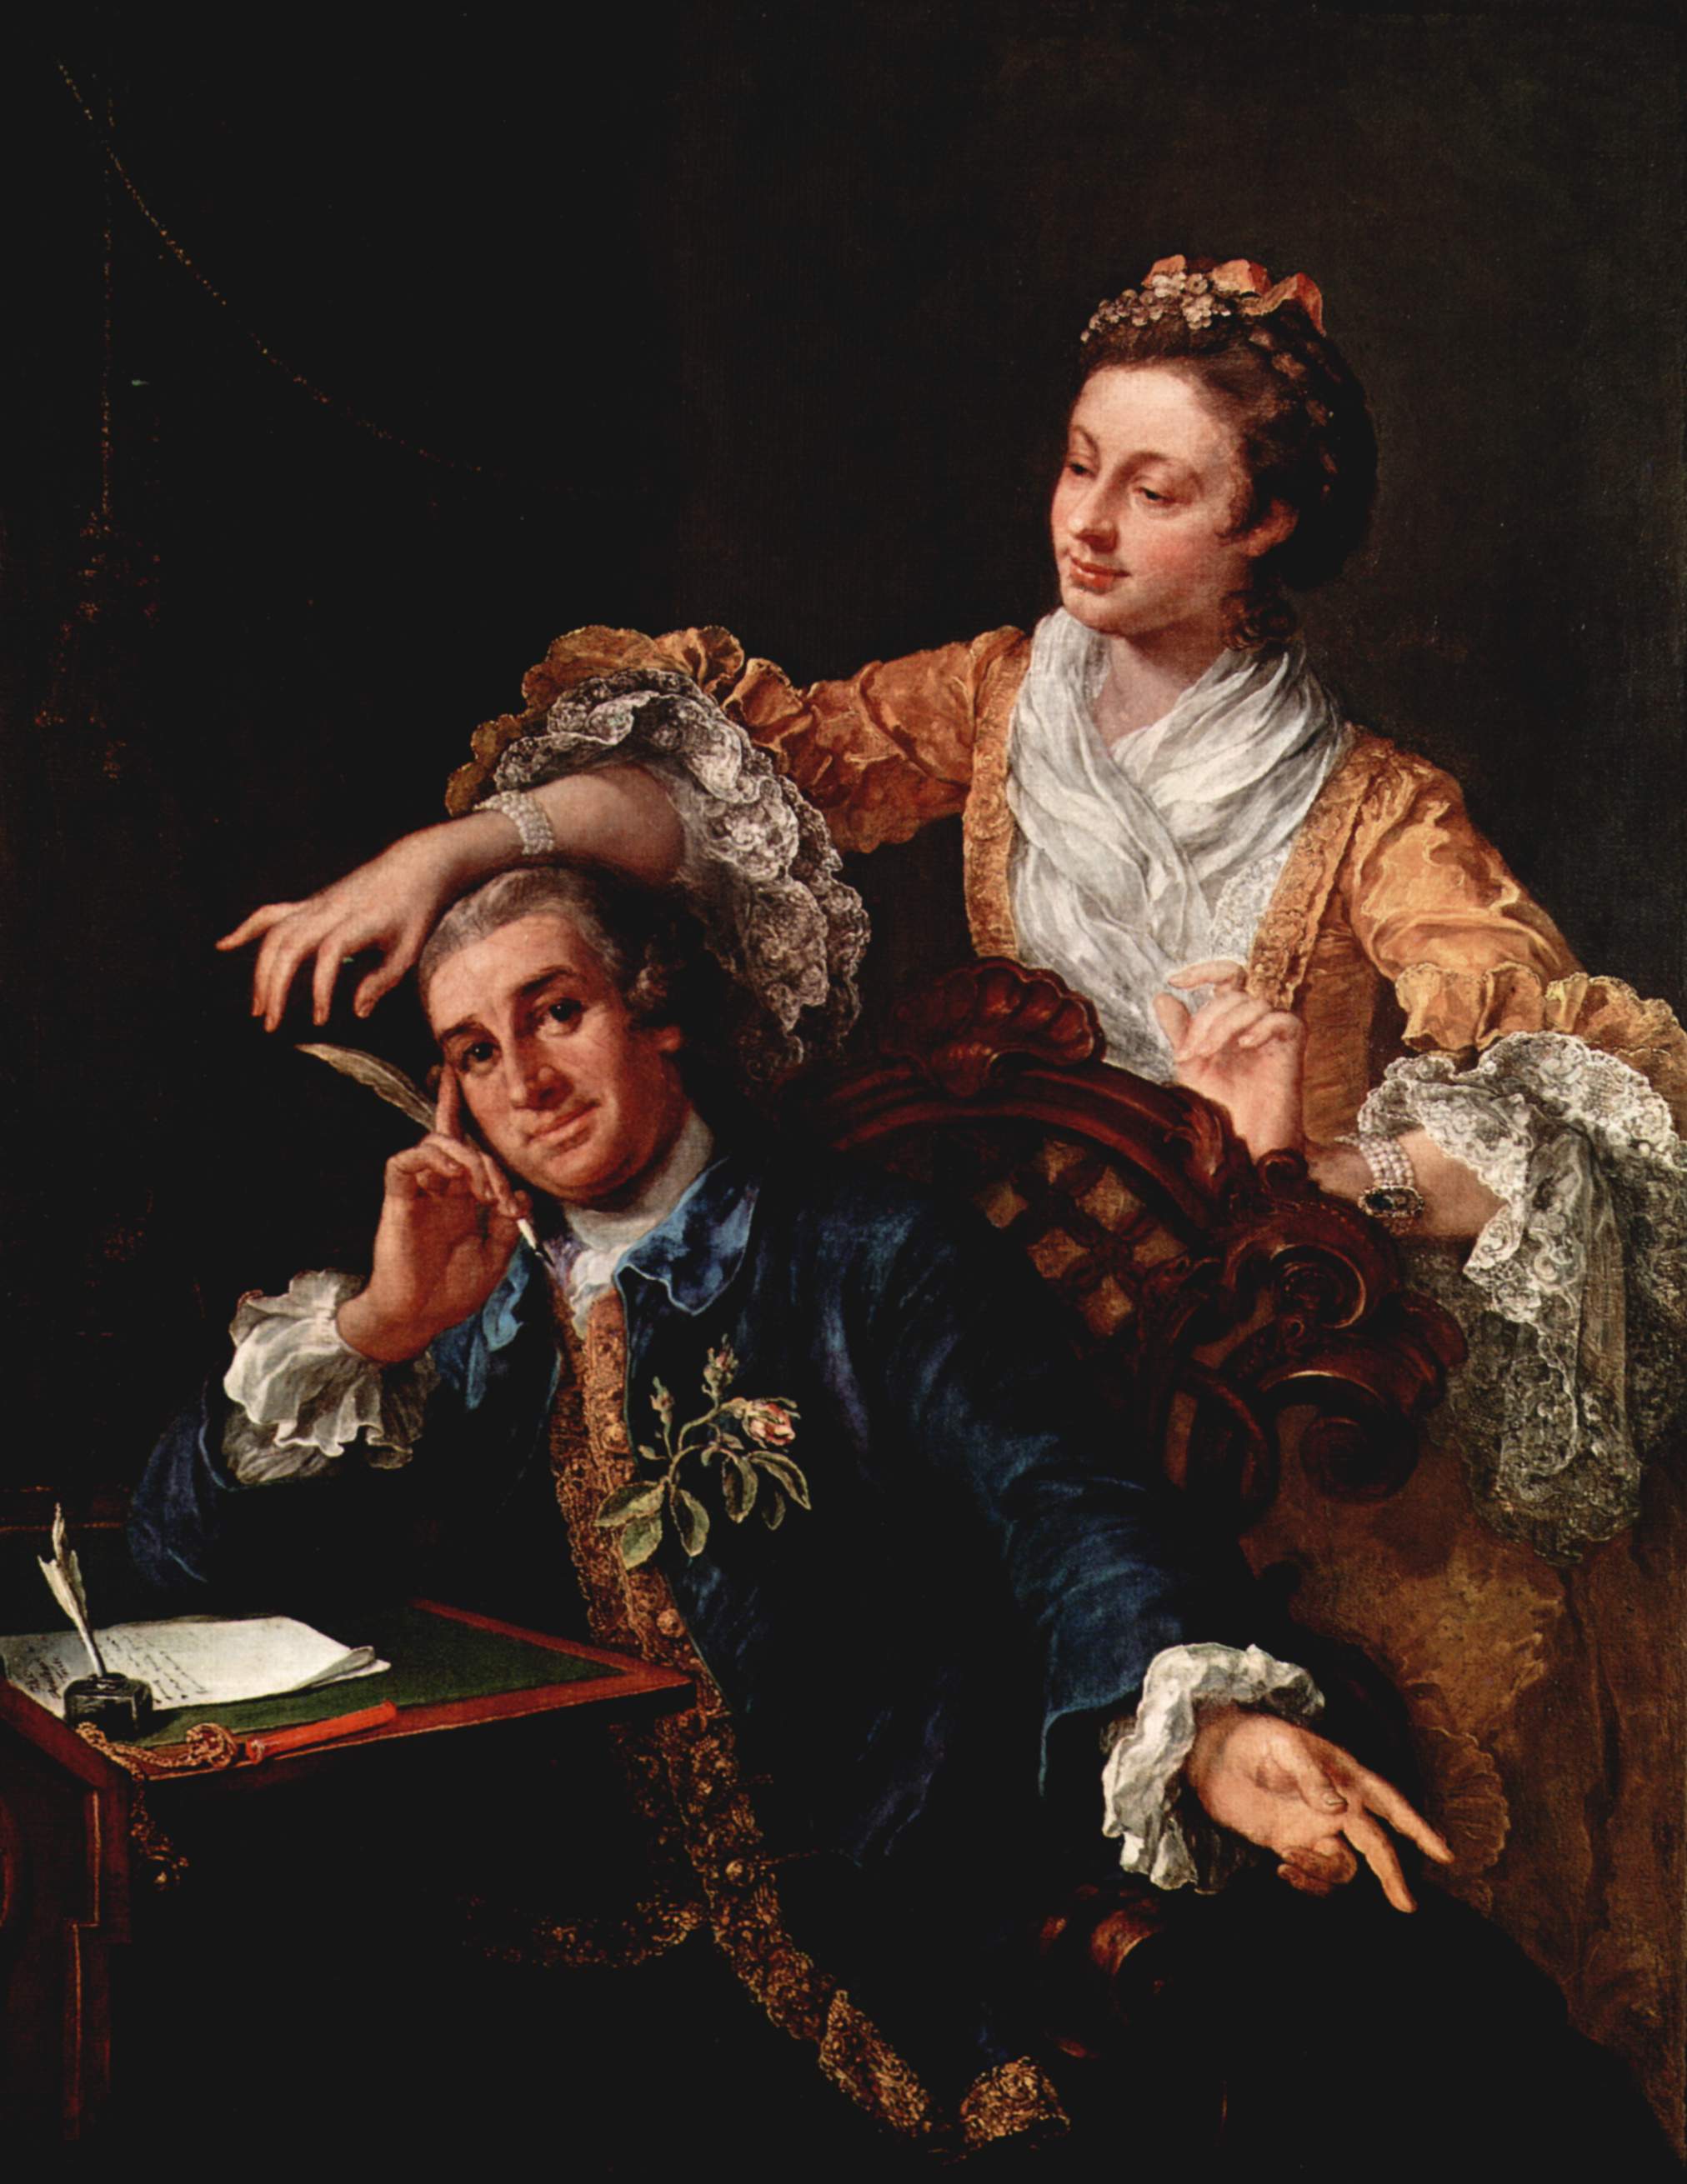 David Garrick And His Wife by William Hogarth, 1757